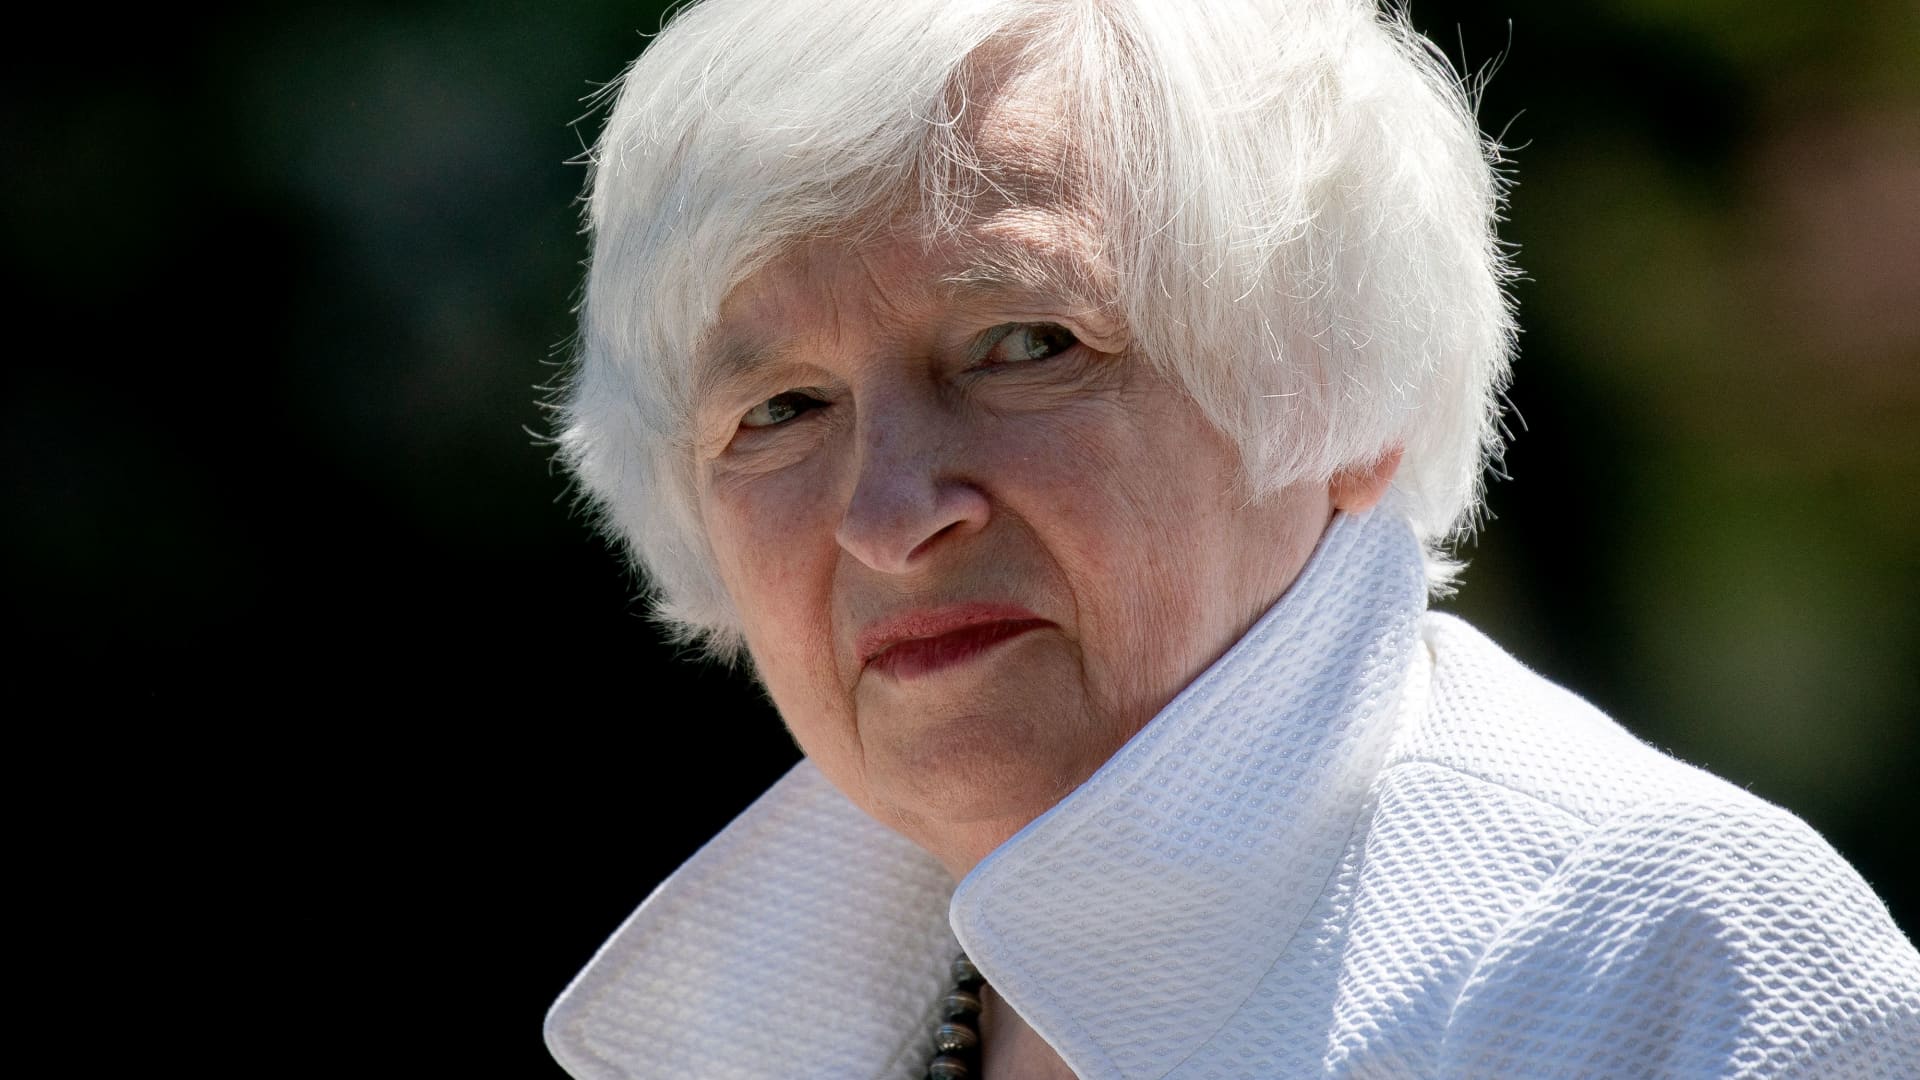 US Treasury Secretary Janet Yellen during a naturalization ceremony at George Washingtons residence in Mount Vernon, Virginia on July 4, 2022.